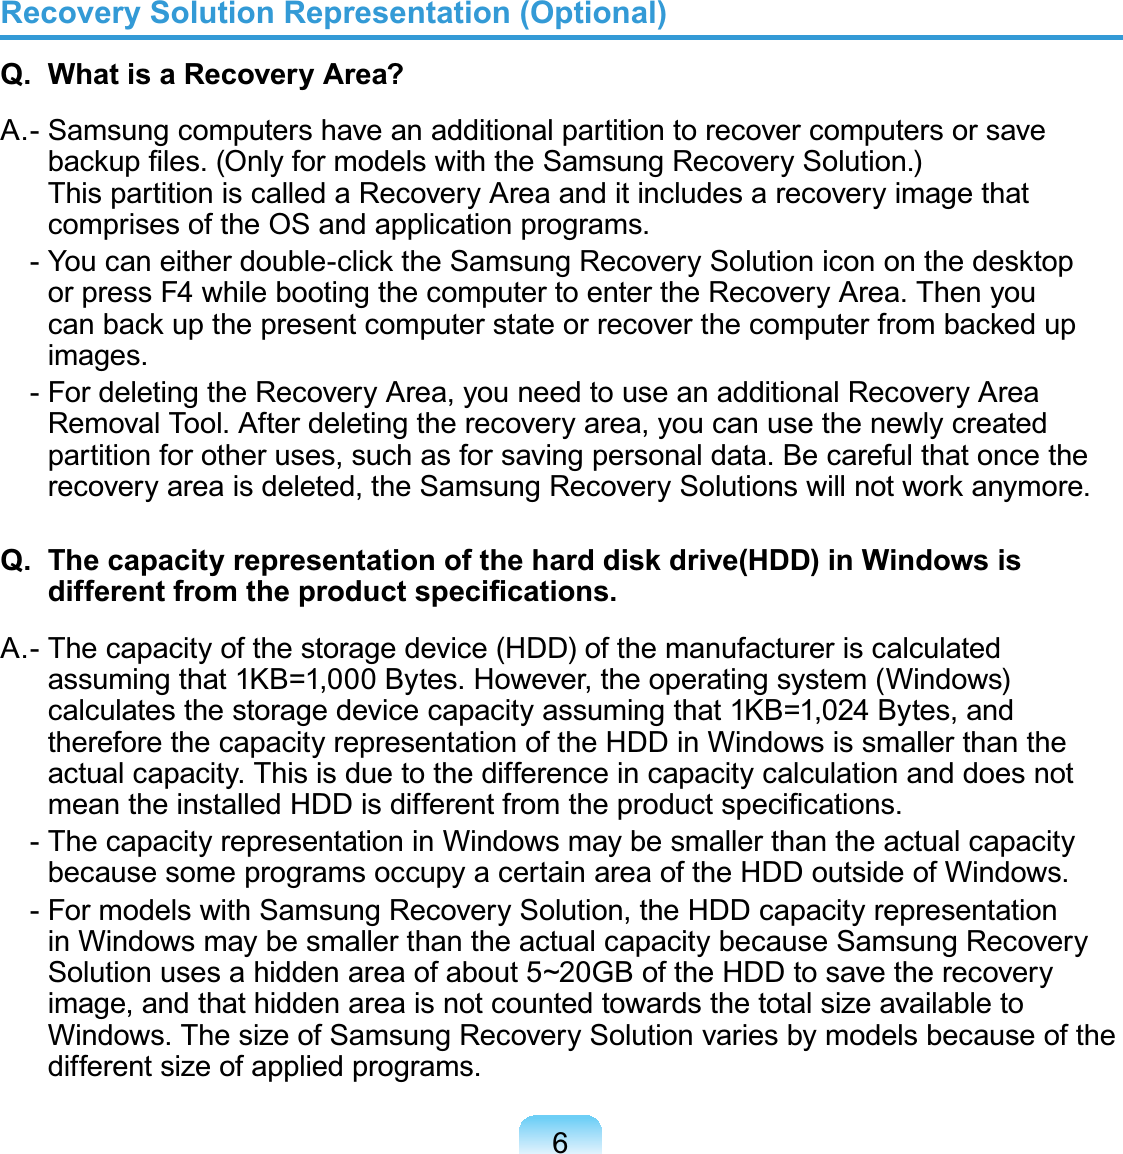 6Recovery Solution Representation (Optional)Q.  What is a Recovery Area?A . - Samsung computers have an additional par tition to rec over computers or saveEDFNXS¿OHV2QO\IRUPRGHOVZLWKWKH6DPVXQJ5HFRYHU\6ROXWLRQThispartitioniscalledaRecoveryAreaanditincludesarecoveryimagethatcomprisesoftheOSandapplicationprograms. &lt;RXFDQHLWKHUGRXEOHFOLFNWKH6DPVXQJ5HFRYHU\6ROXWLRQLFRQRQWKHGHVNWRSorpressF4whilebootingthecomputertoentertheRecoveryArea.ThenyouFDQEDFNXSWKHSUHVHQWFRPSXWHUVWDWHRUUHFRYHUWKHFRPSXWHUIURPEDFNHGXSimages. -FordeletingtheRecoveryArea,youneedtouseanadditionalRecoveryAreaRemovalTool.Afterdeletingtherecoveryarea,youcanusethenewlycreatedpartitionforotheruses,suchasforsavingpersonaldata.BecarefulthatoncetheUHFRYHU\DUHDLVGHOHWHGWKH6DPVXQJ5HFRYHU\6ROXWLRQVZLOOQRWZRUNDQ\PRUHQ.  The capacity representation of the hard disk drive(HDD) in Windows is GLIIHUHQWIURPWKHSURGXFWVSHFL¿FDWLRQVA . - The c apacit y of the storage device (HD D) of the manufacturer is c alculatedassuming that 1KB=1,000 Bytes. However, the operating system (Windows)calculatesthestoragedevicecapacityassumingthat1KB=1,024 Bytes,andtherefore the capacity representation of the HDD in Windows is smaller than theactualcapacity.ThisisduetothedifferenceincapacitycalculationanddoesnotPHDQWKHLQVWDOOHG+&apos;&apos;LVGLIIHUHQWIURPWKHSURGXFWVSHFL¿FDWLRQV - The capacity representation in Windows may be smaller than the actual capacitybecausesomeprogramsoccupyacertainareaoftheHDDoutsideofWindows. - For models with Samsung Recovery Solution, the HDD capacity representationinWindowsmaybesmallerthantheactualcapacitybecauseSamsungRecoverySolution uses a hidden area of about 5~20GB of the HDD to save the recoveryimage,andthathiddenareaisnotcountedtowardsthetotalsizeavailabletoWindows.ThesizeofSamsungRecoverySolutionvariesbymodelsbecauseofthedifferent size of applied programs.